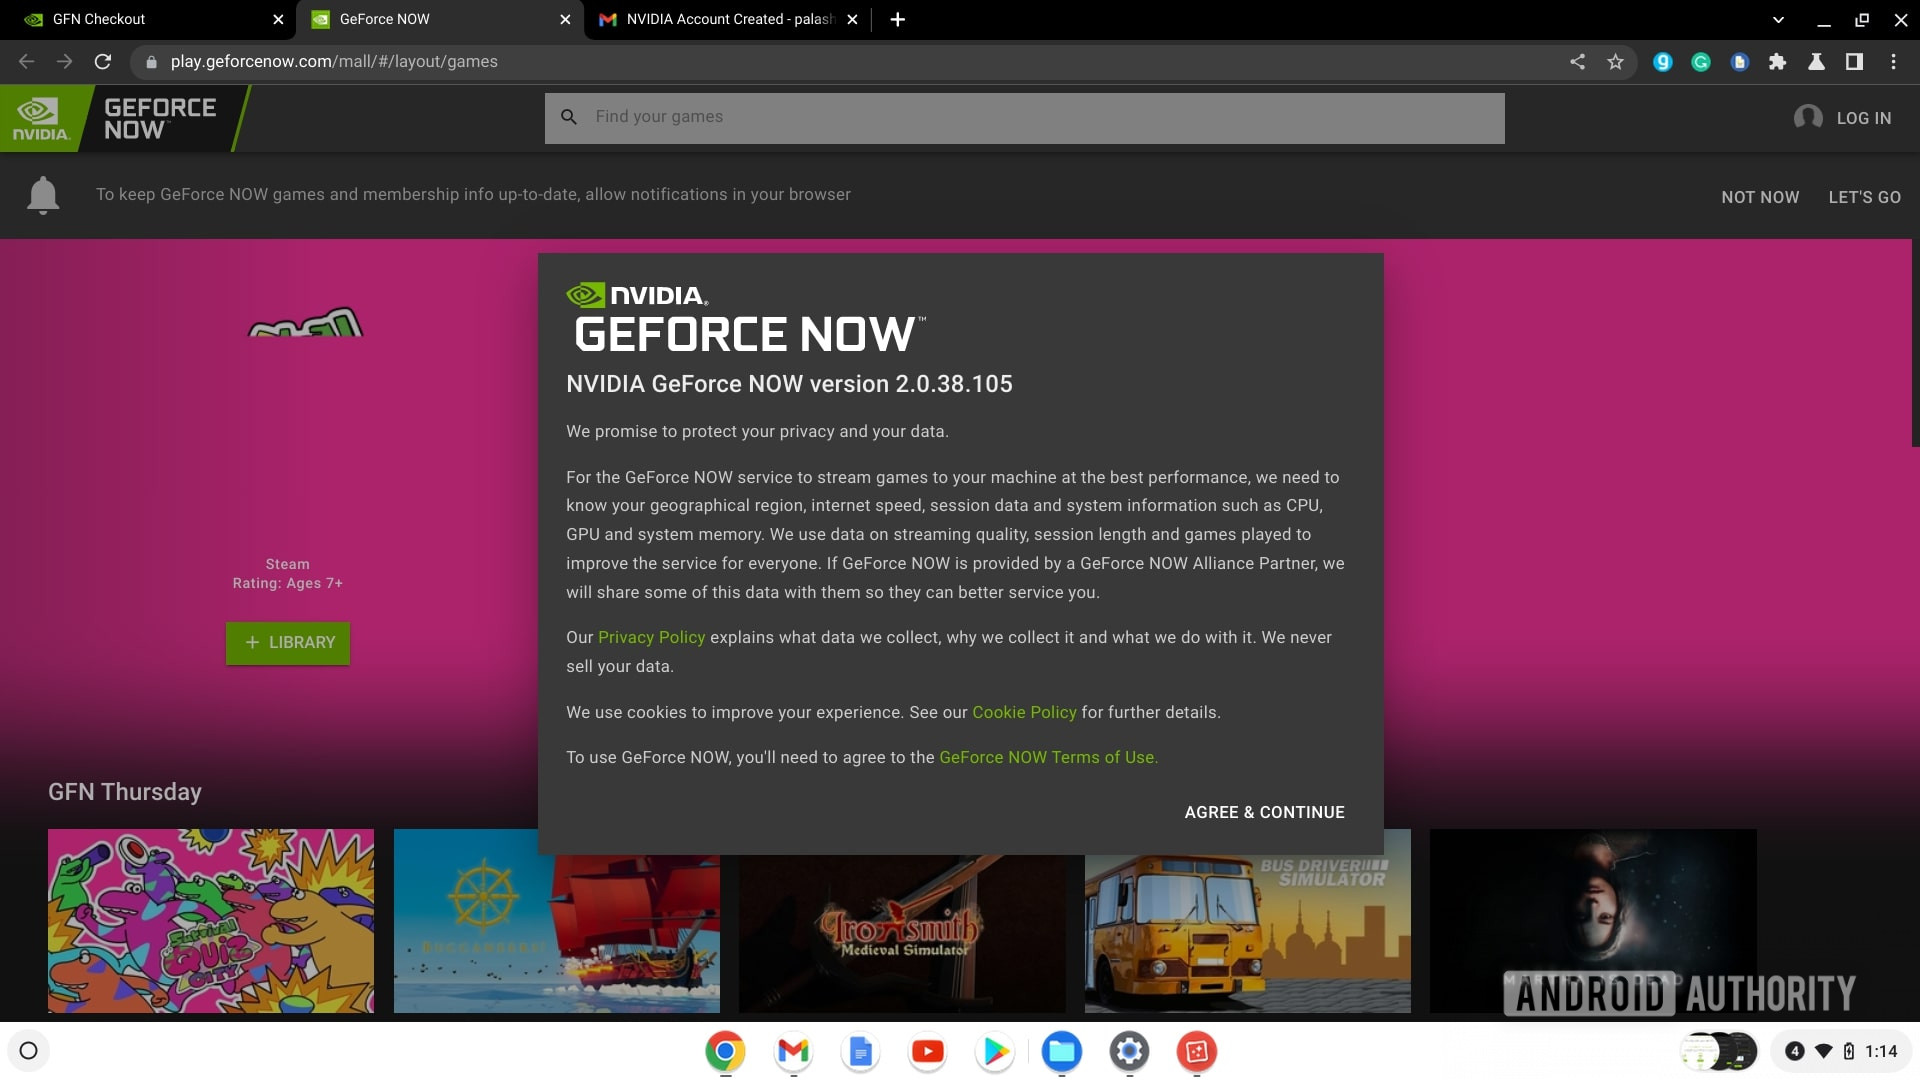 Nvidia GeForce Now agree and continue